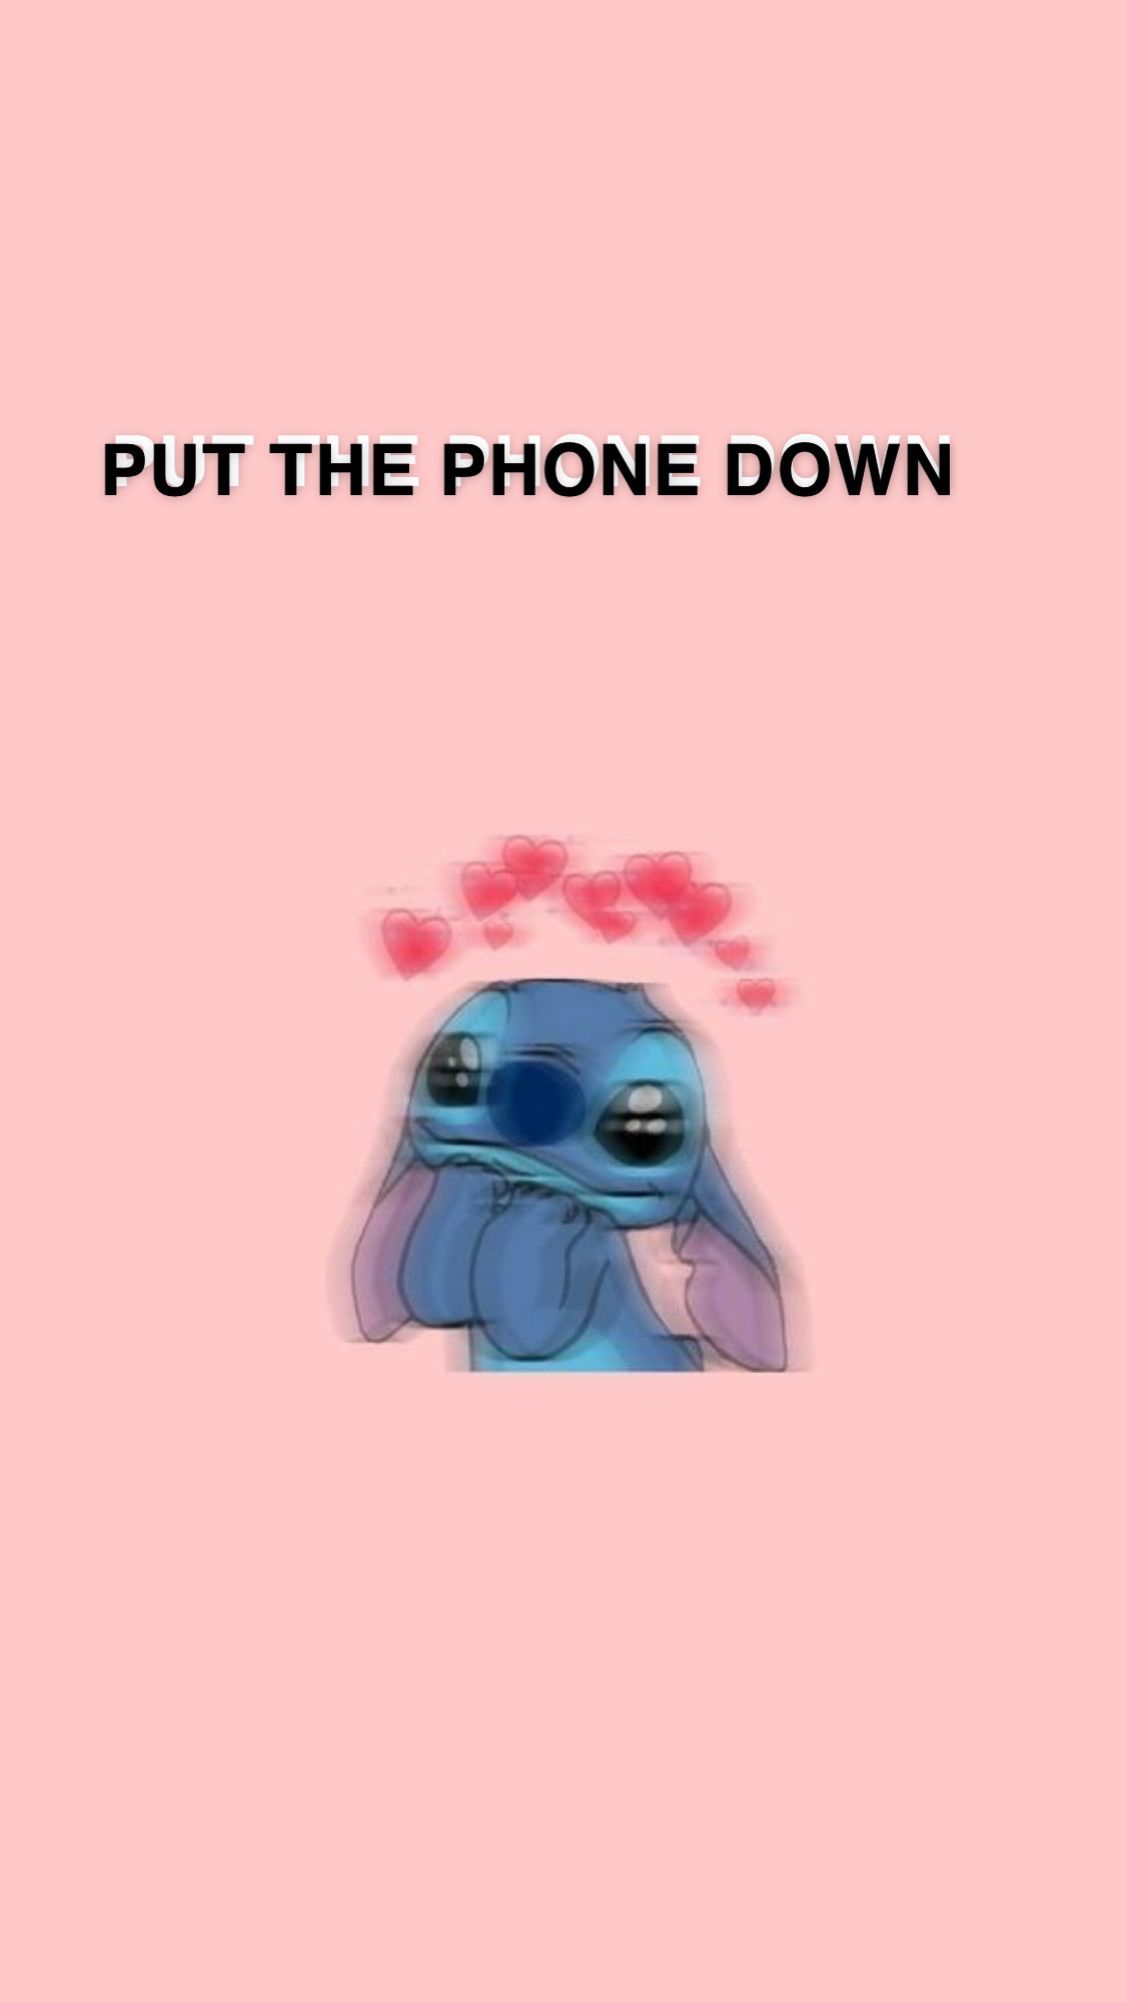 PUT THE PHONE DOWN wallpaper. Funny phone wallpaper, Pink wallpaper cartoon, Dont touch my phone wallpaper